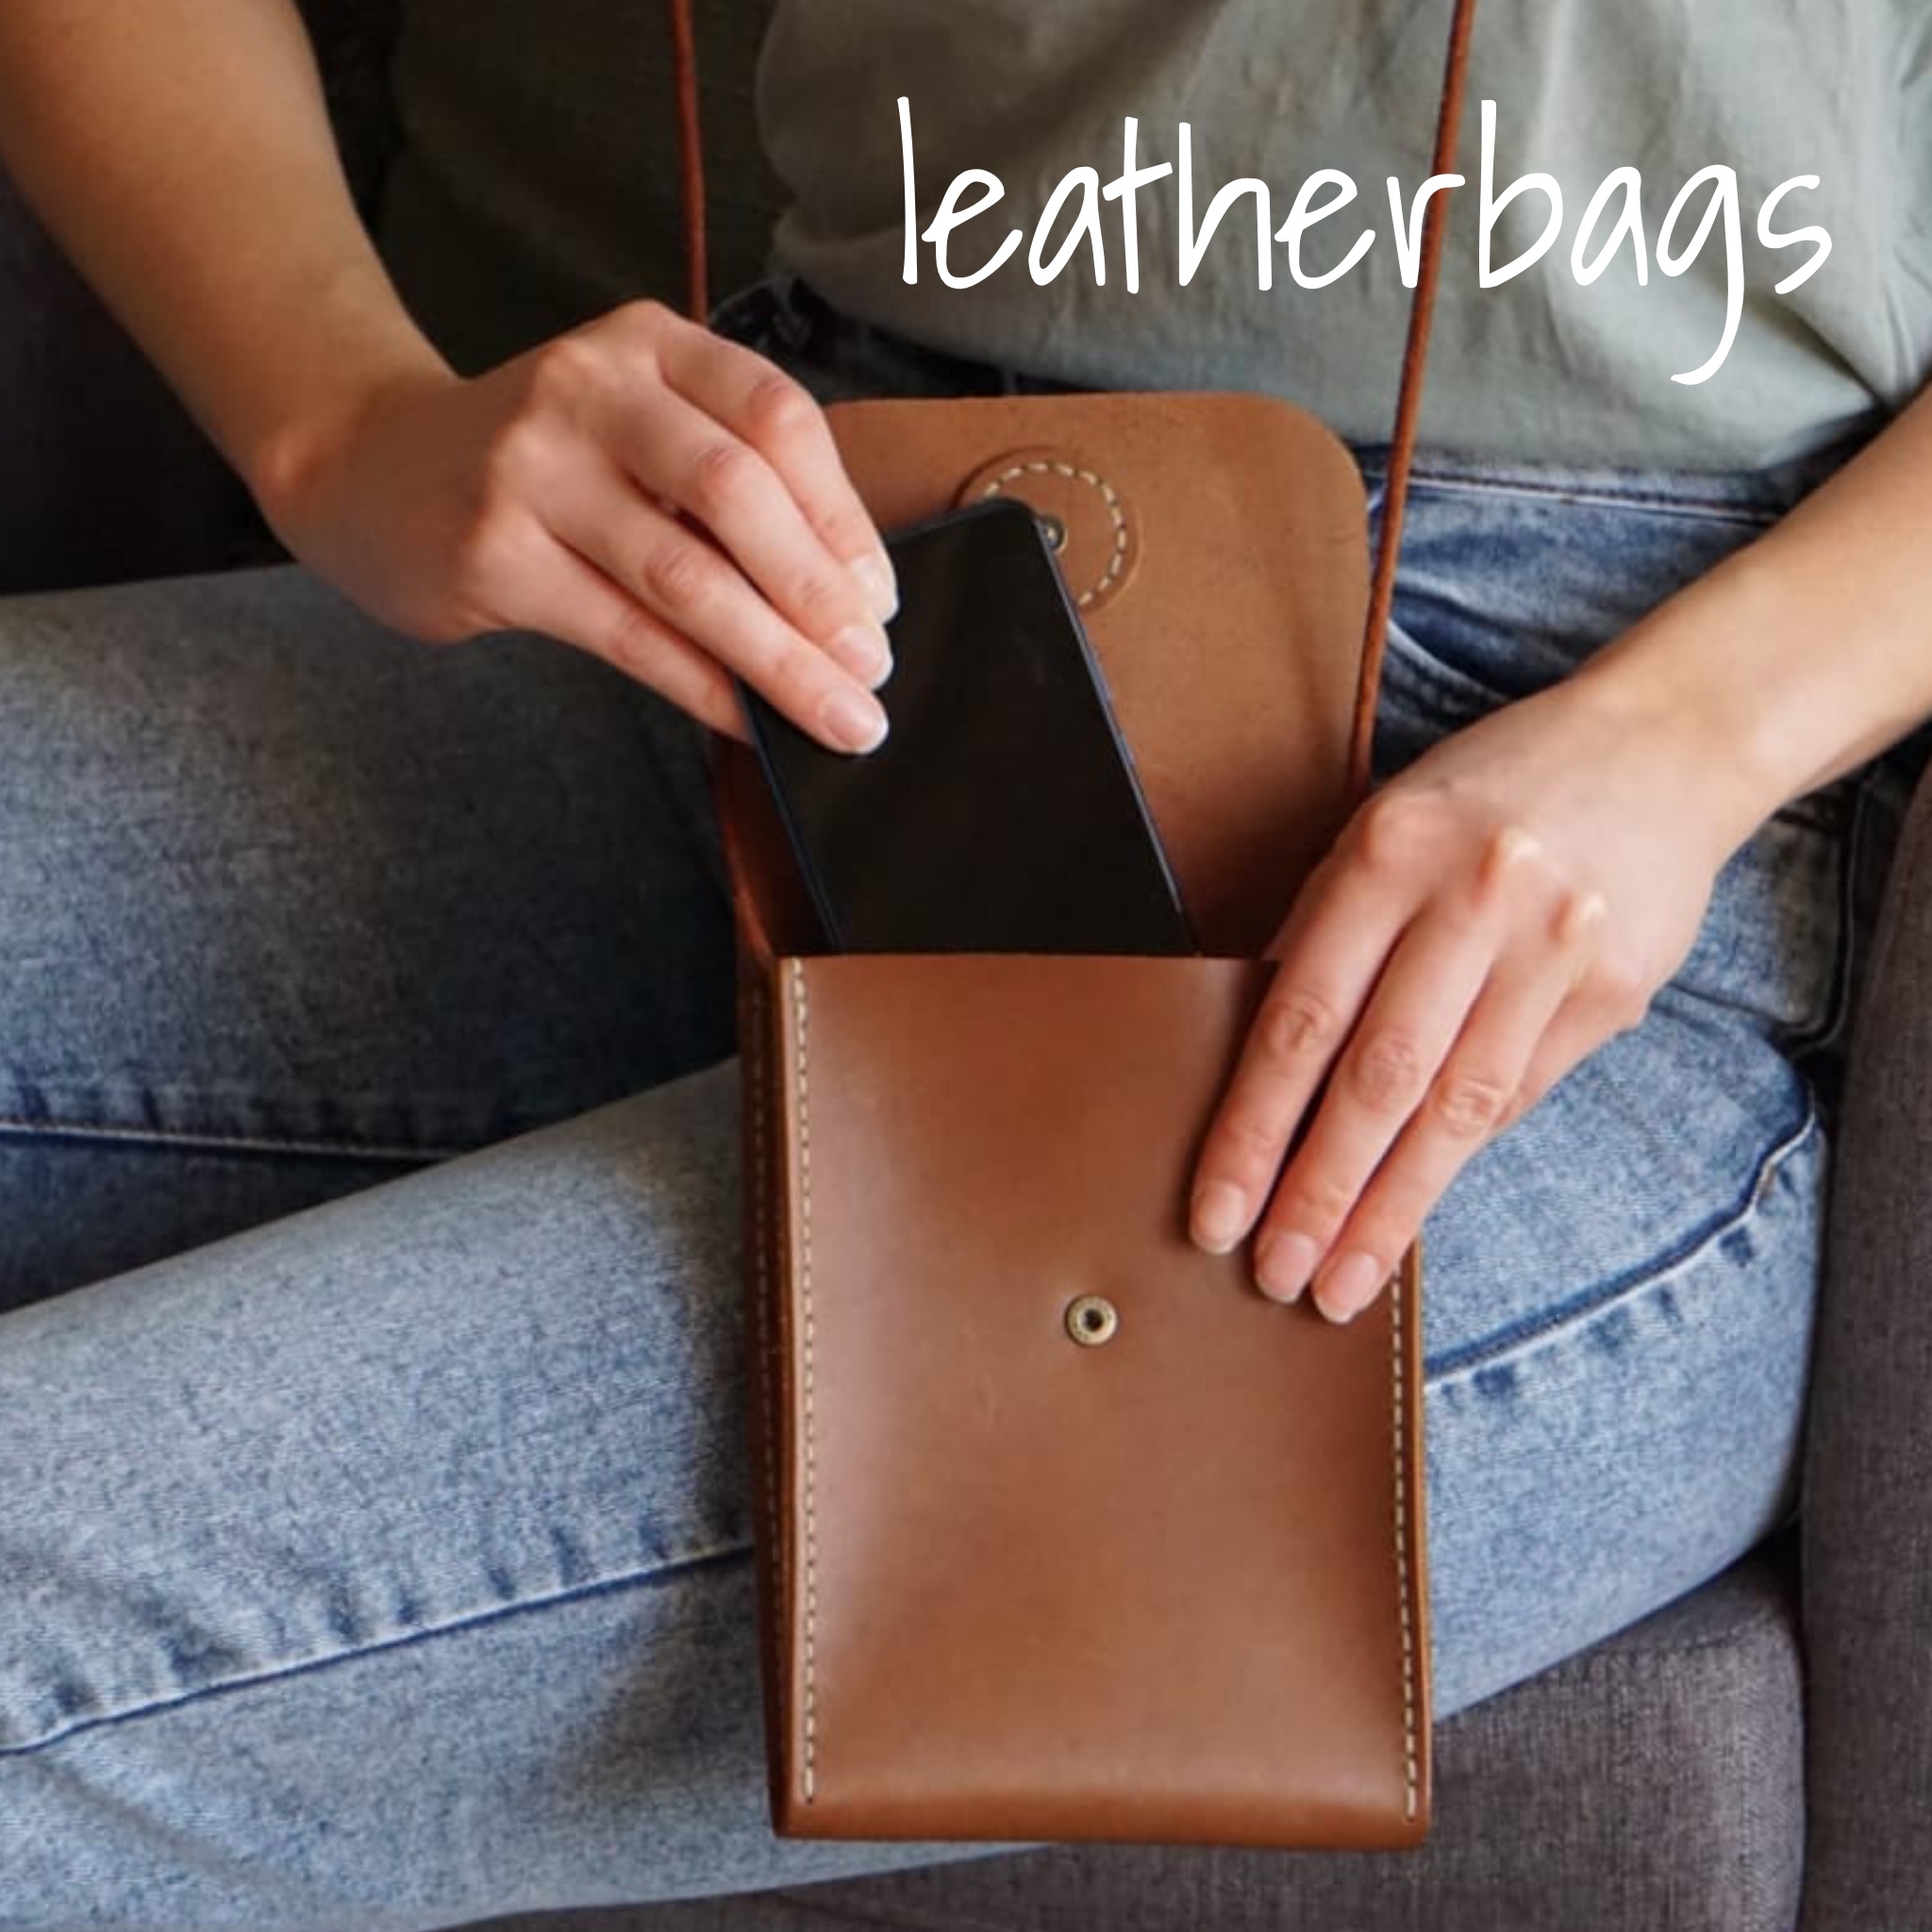 Leatherbags